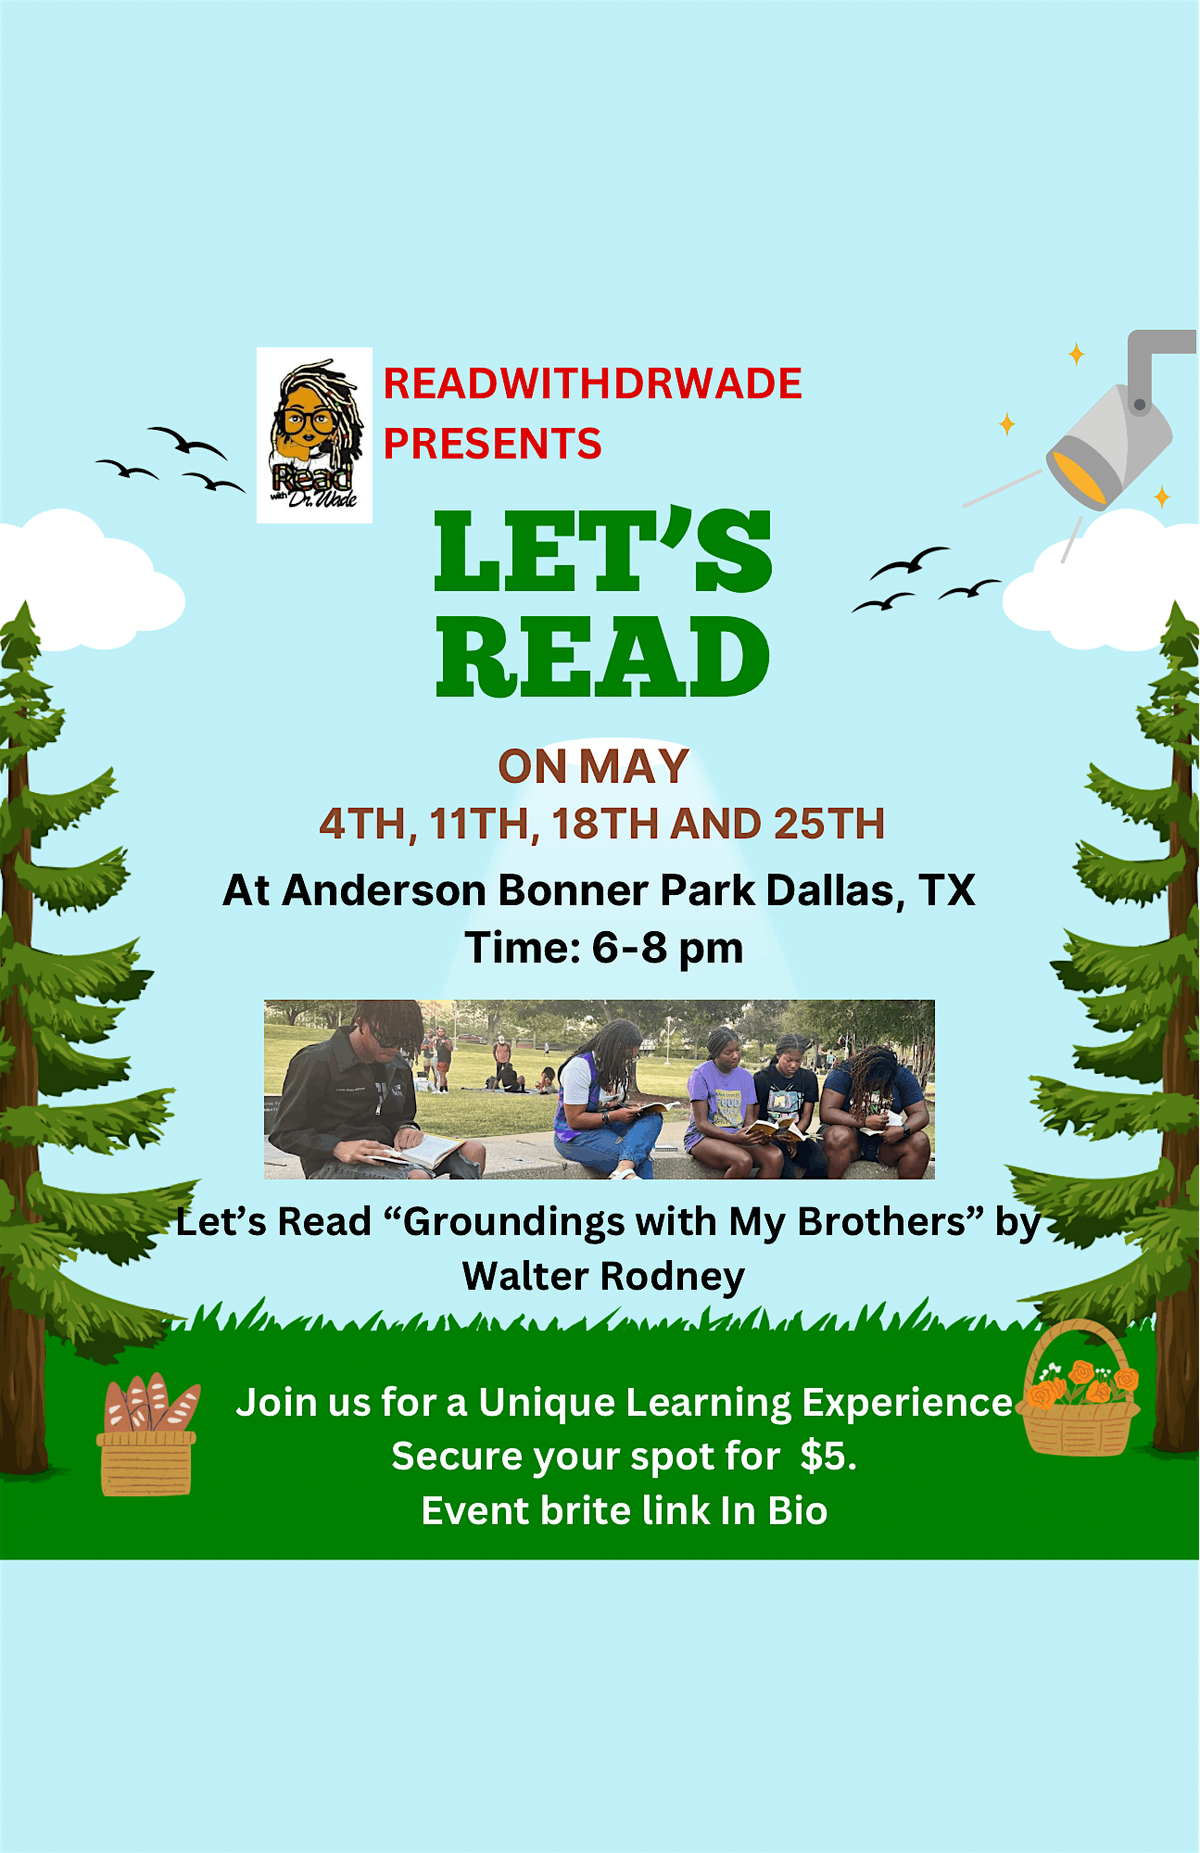 Read With Dr. Wade Book Club